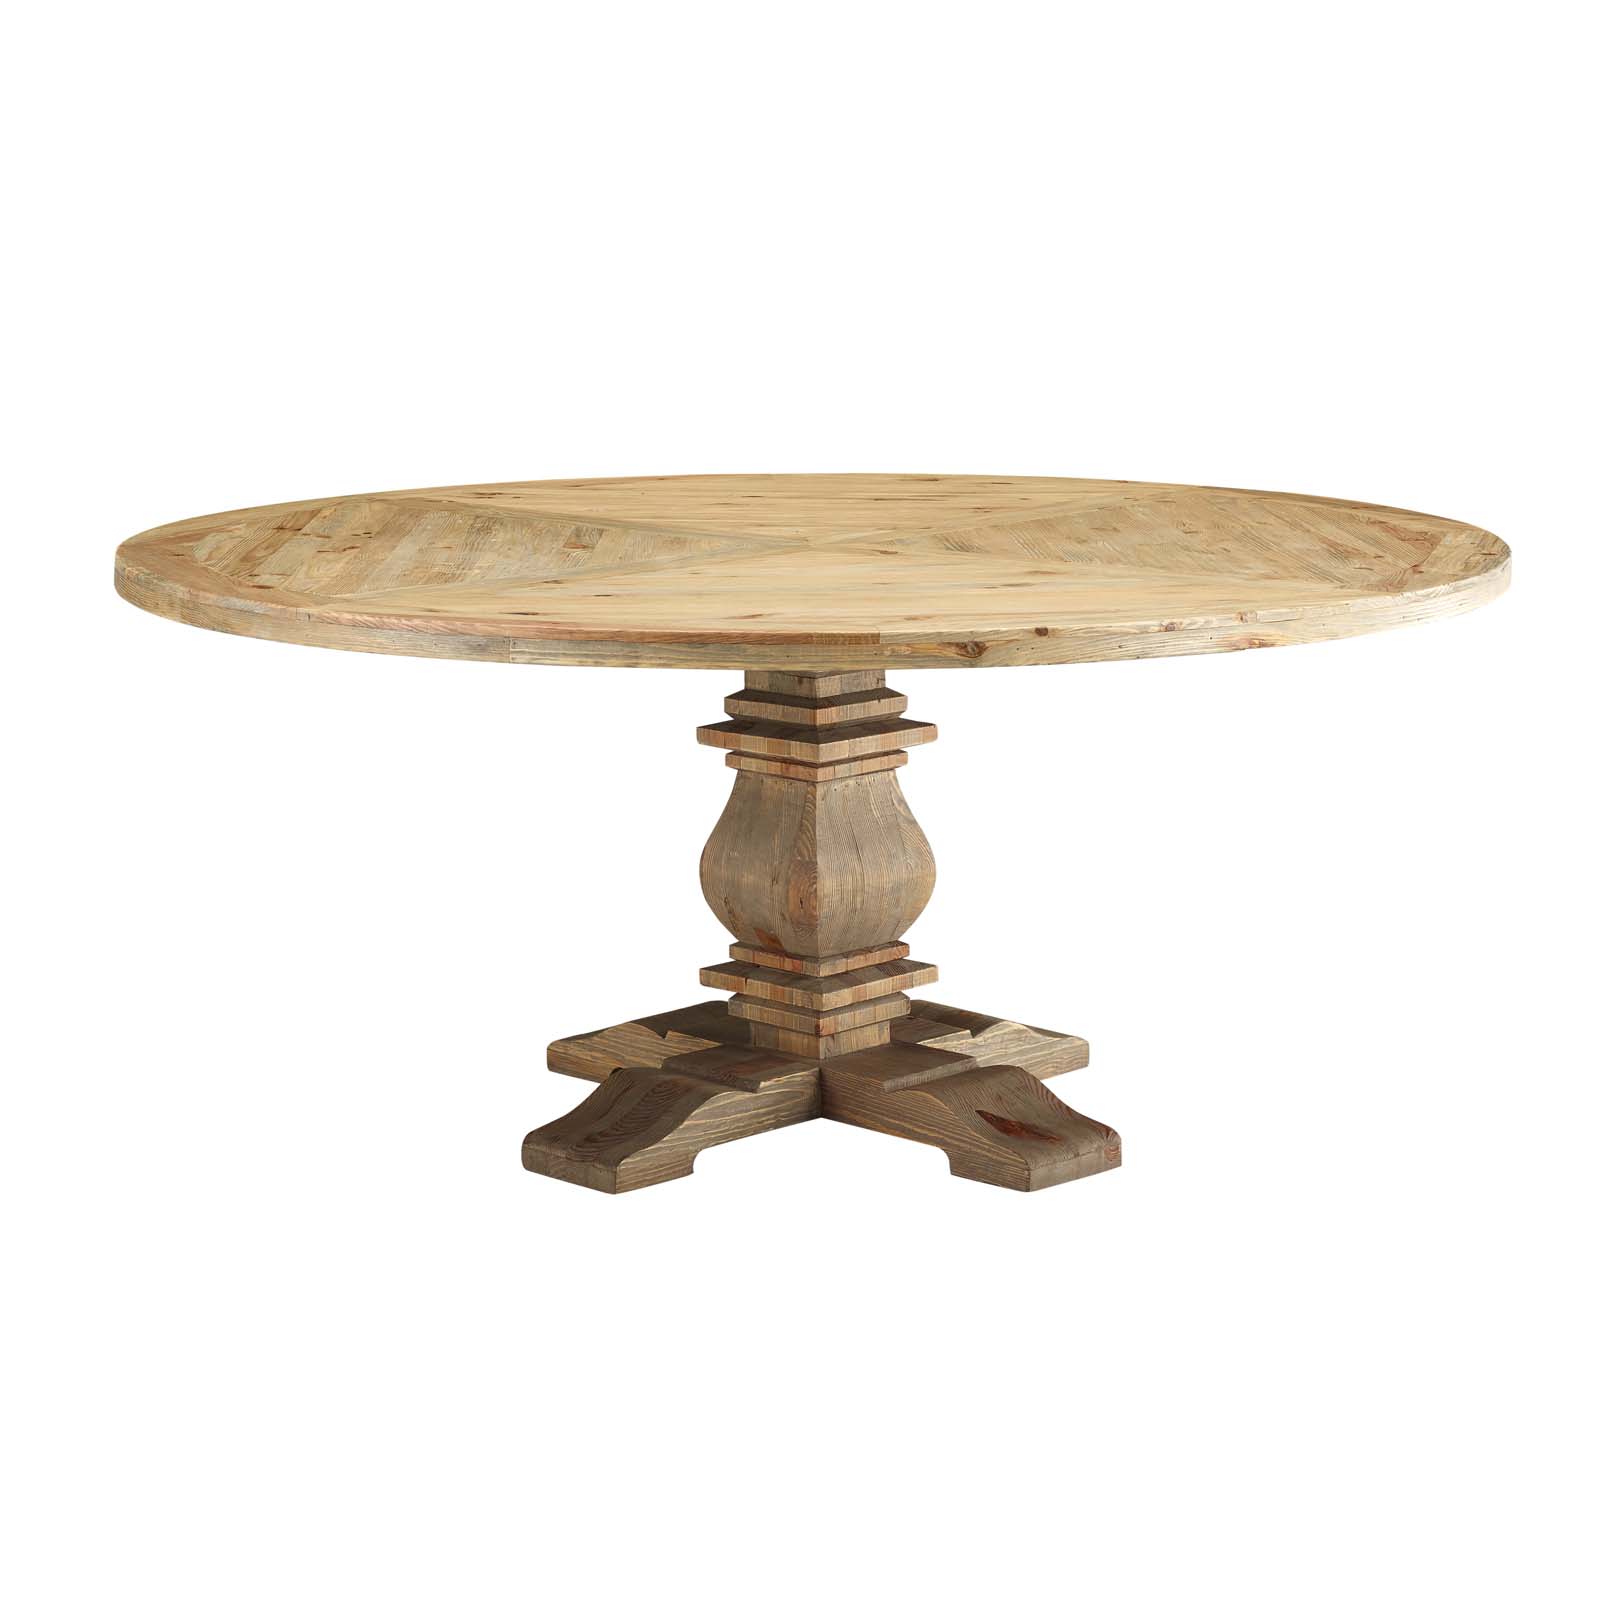 Column 71" Round Pine Wood Dining Table Brown